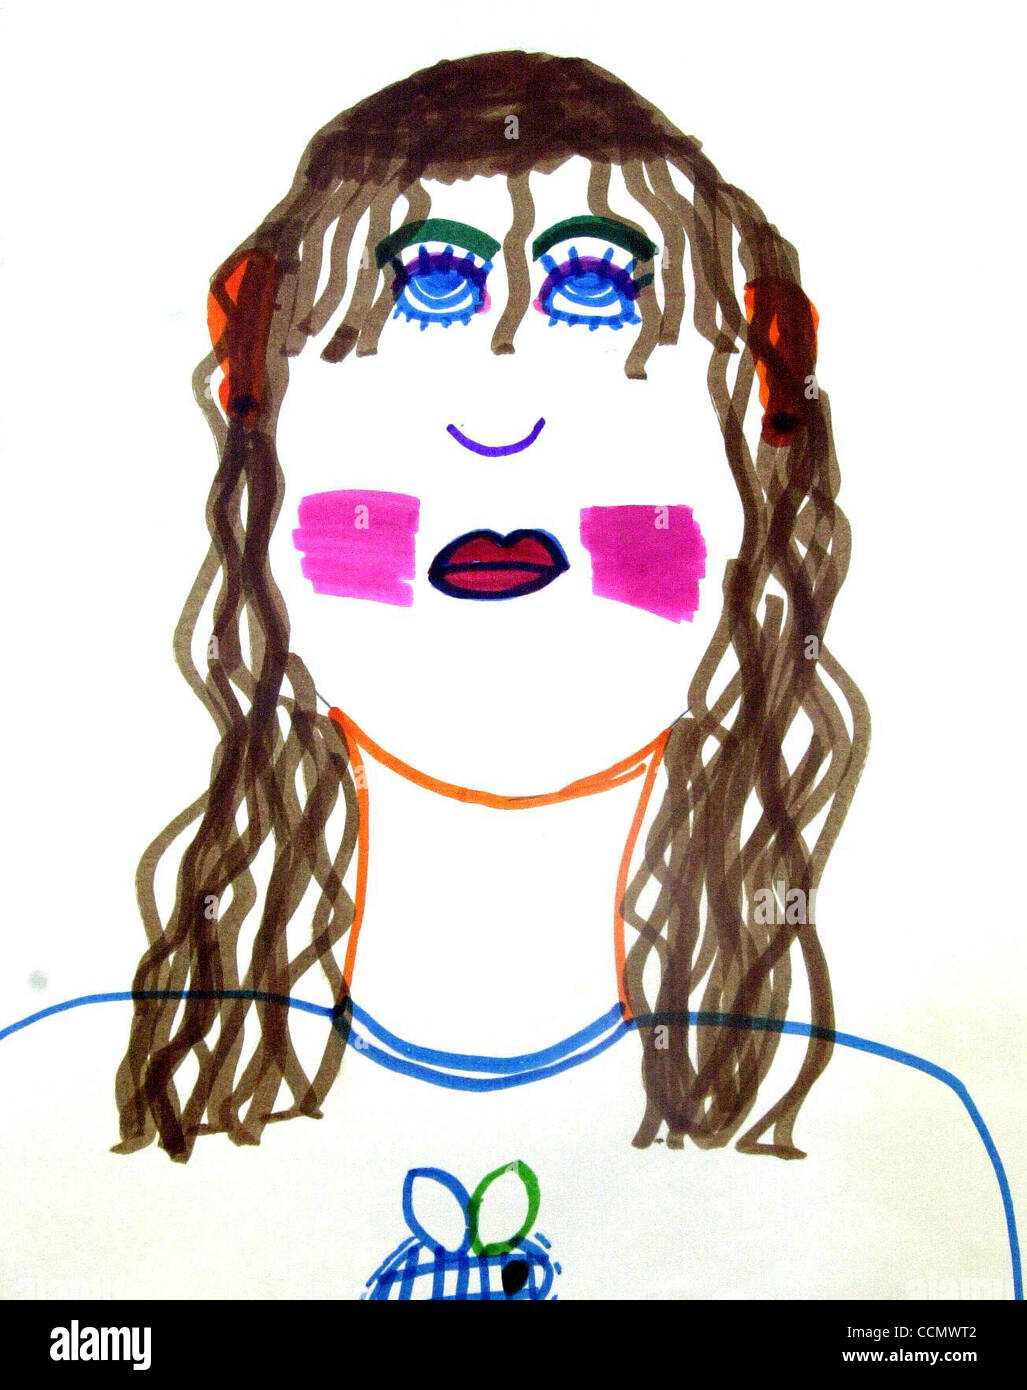 Student Briana Jacobson made this portrait titled ME with felt pens, at the Rivertown Art Center in Antioch California on Tuesday, June 29, 2004. The student show is currently running.  (Contra Costa Times/HERMAN BUSTAMANTE JR.) Stock Photo